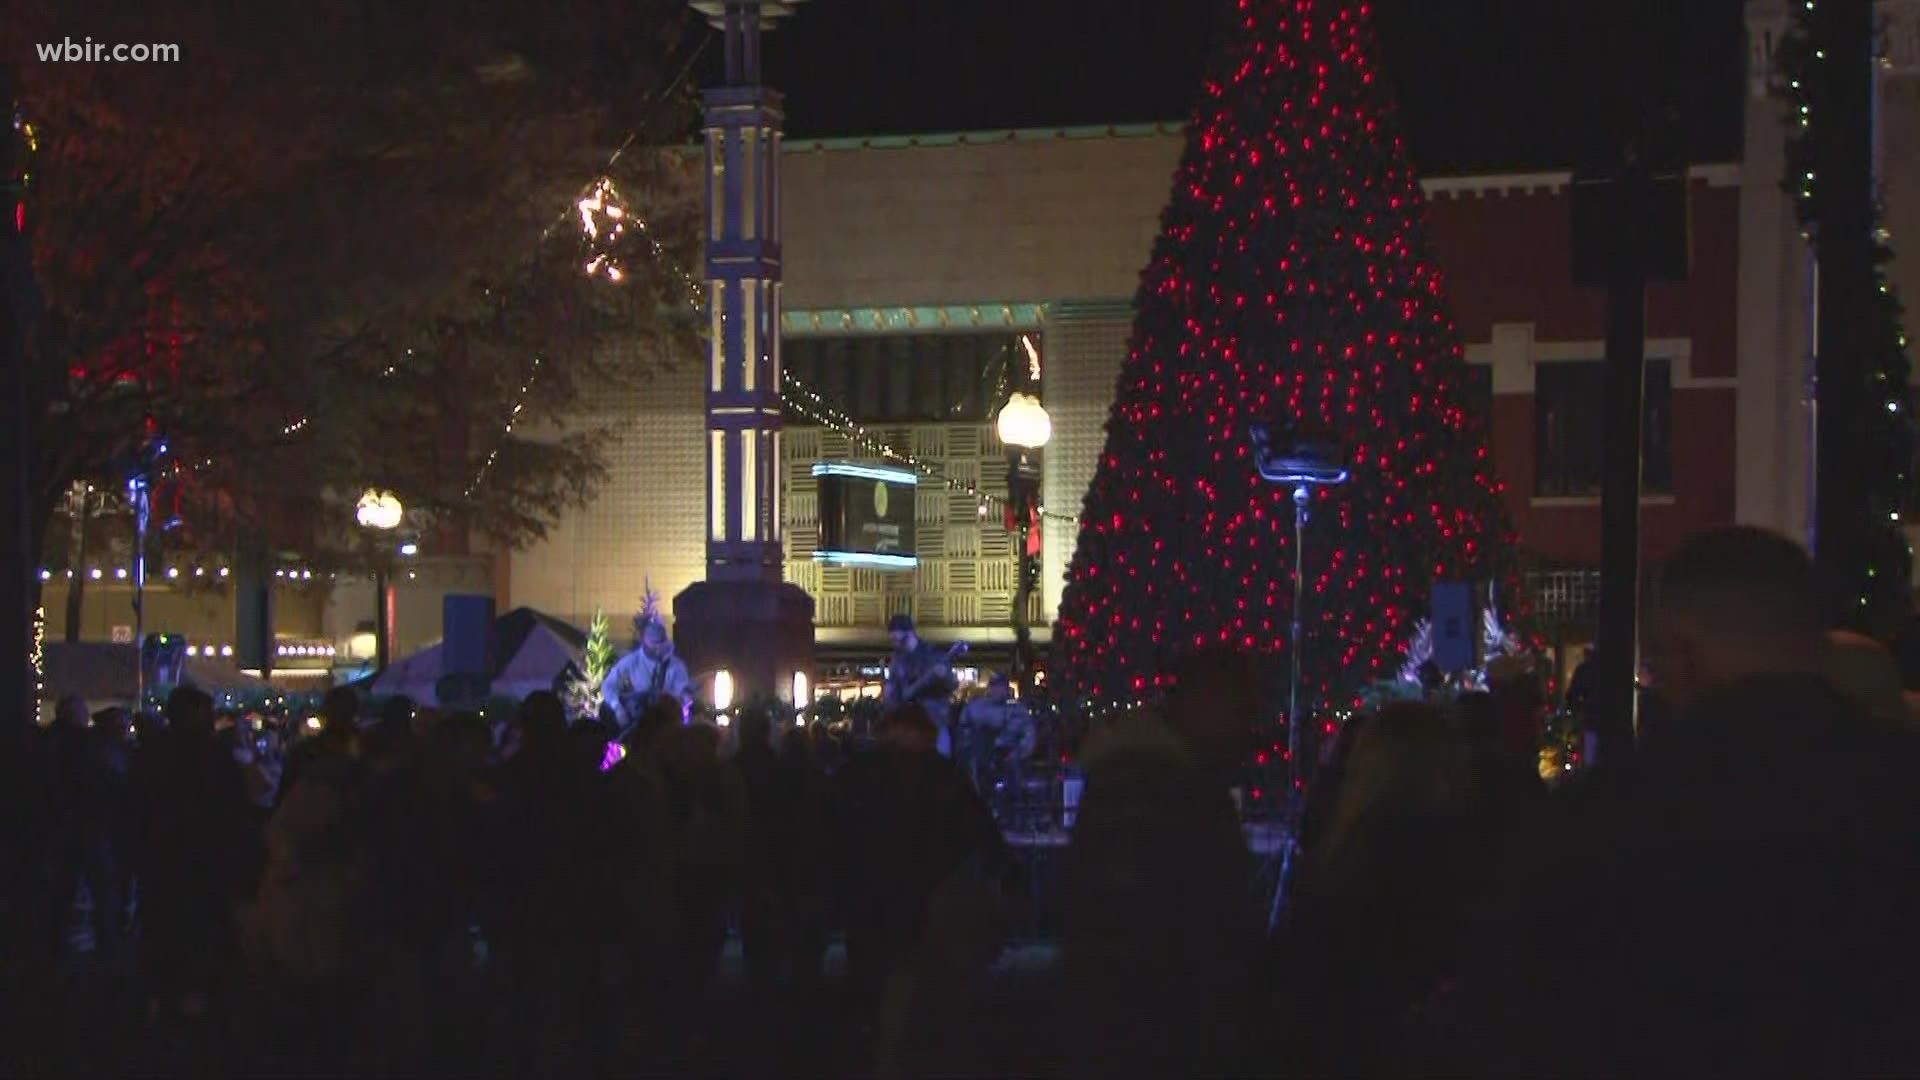 Friday kicked off several month-long holiday events across Knoxville.